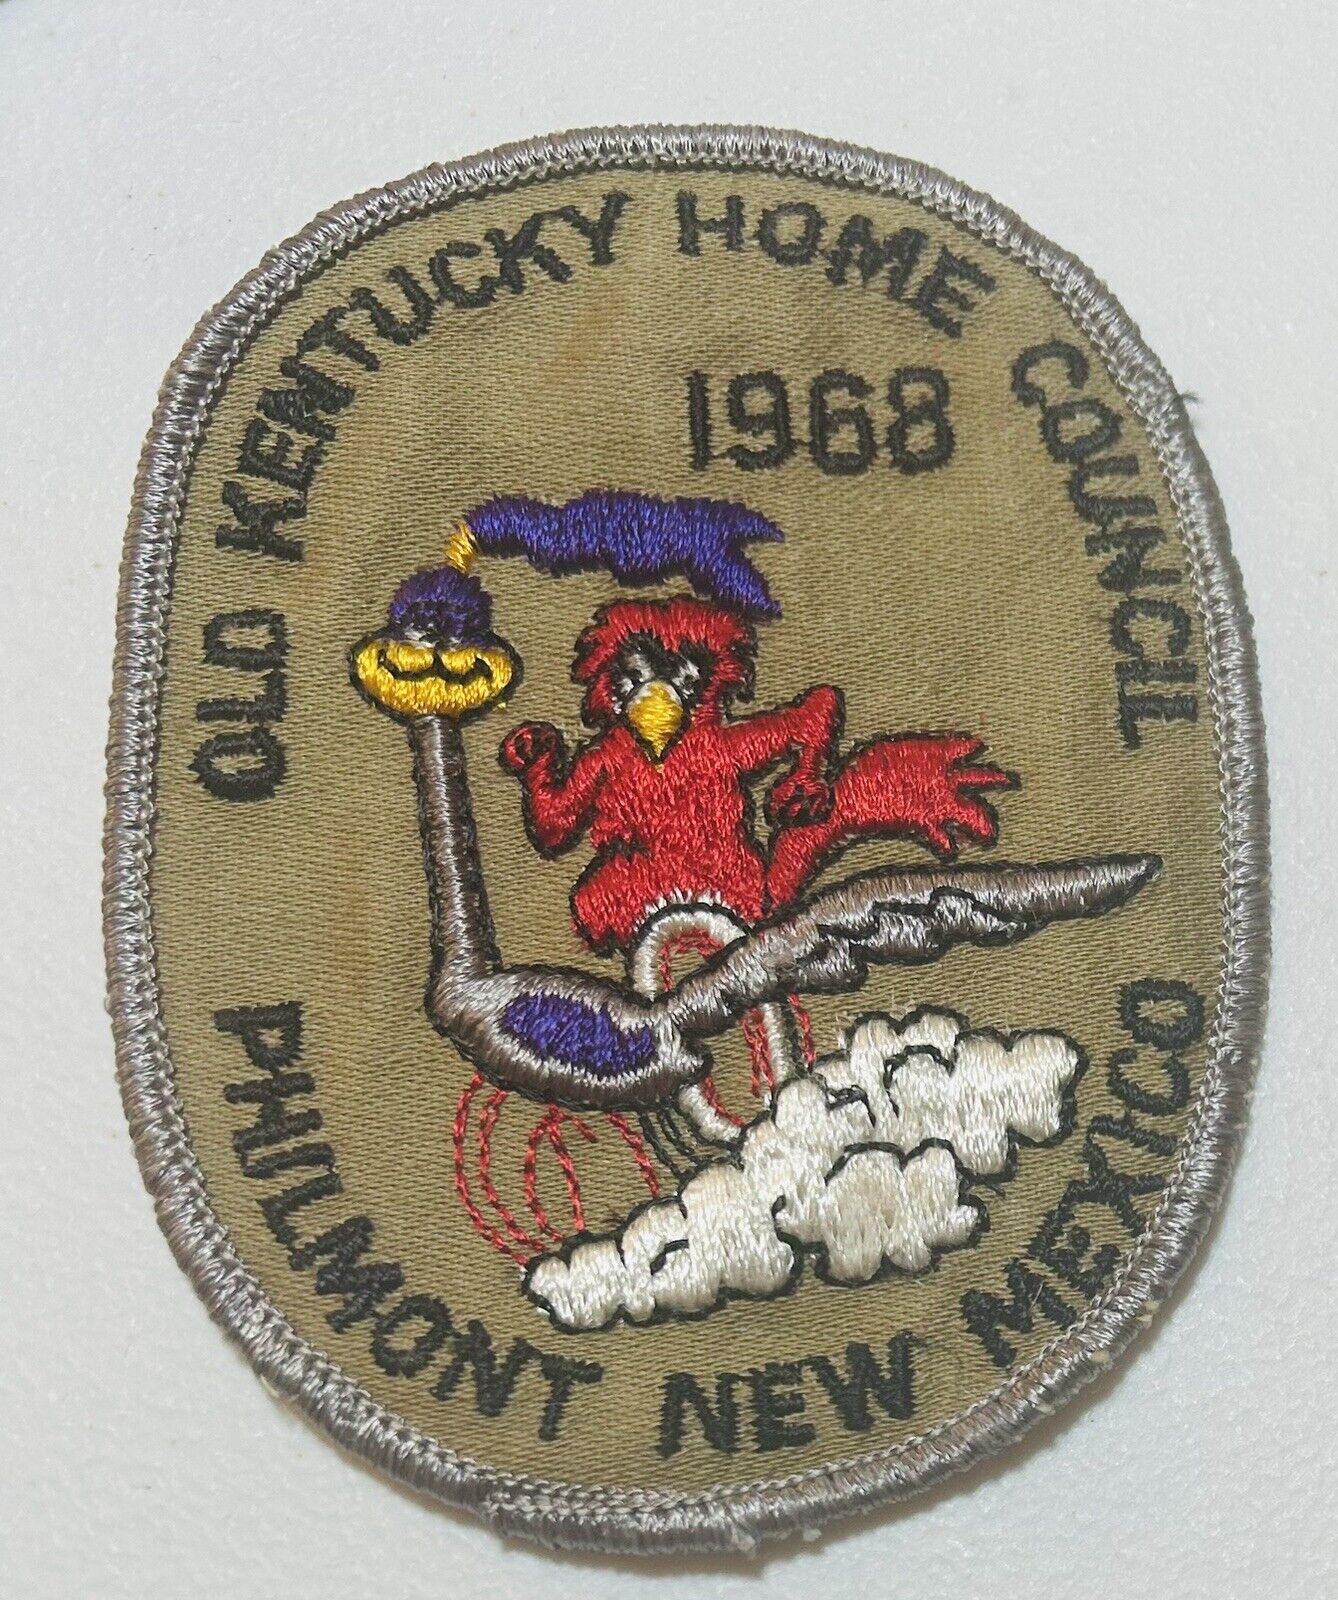 Old Kentucky Home Council 1968 Philmont Patch